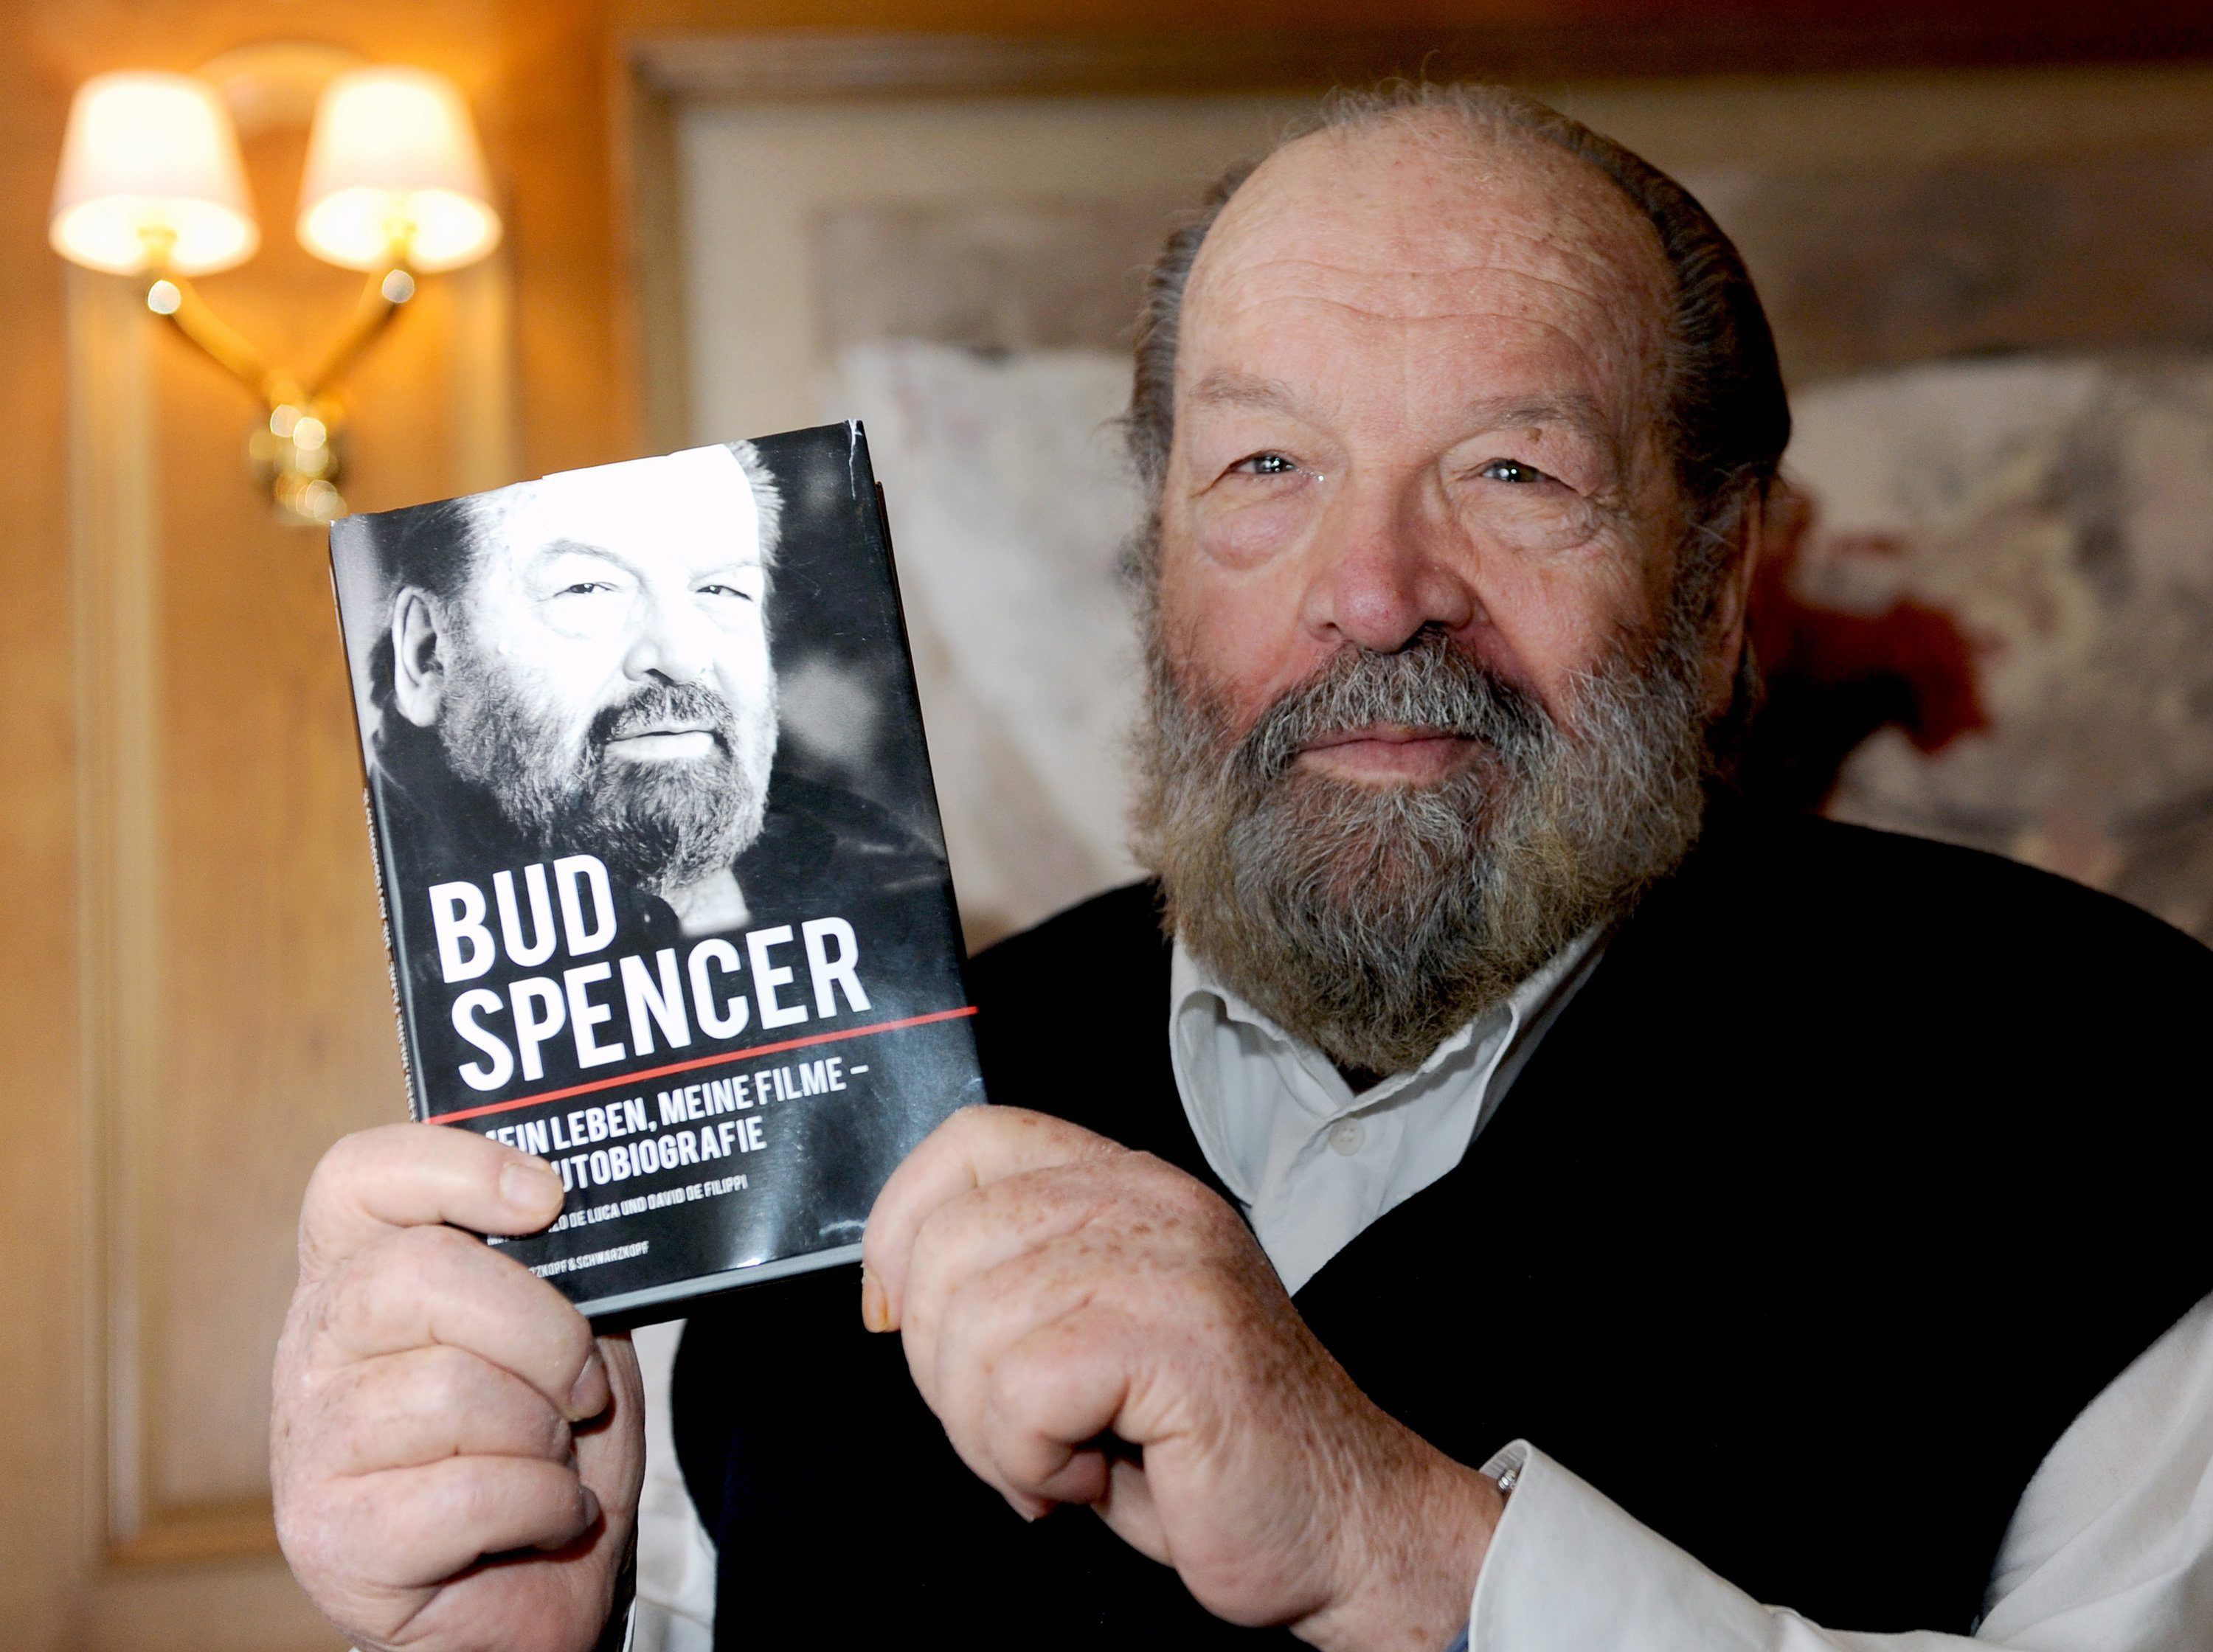 Bud Spencer deja solo a Terence Hill